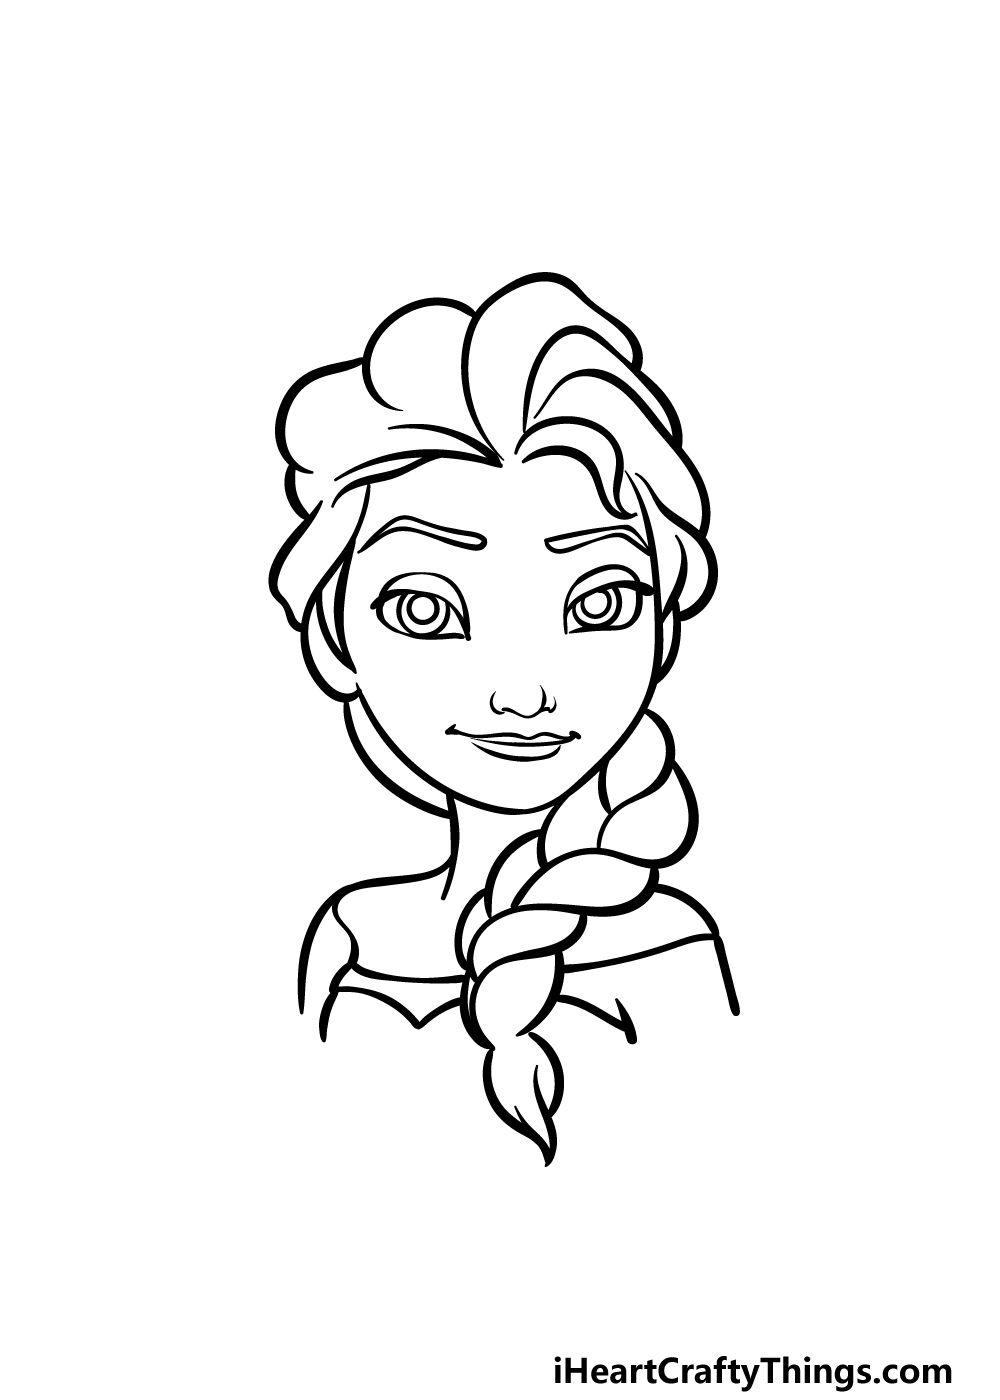 How To Draw Chibi Elsa by Twinzee on DeviantArt